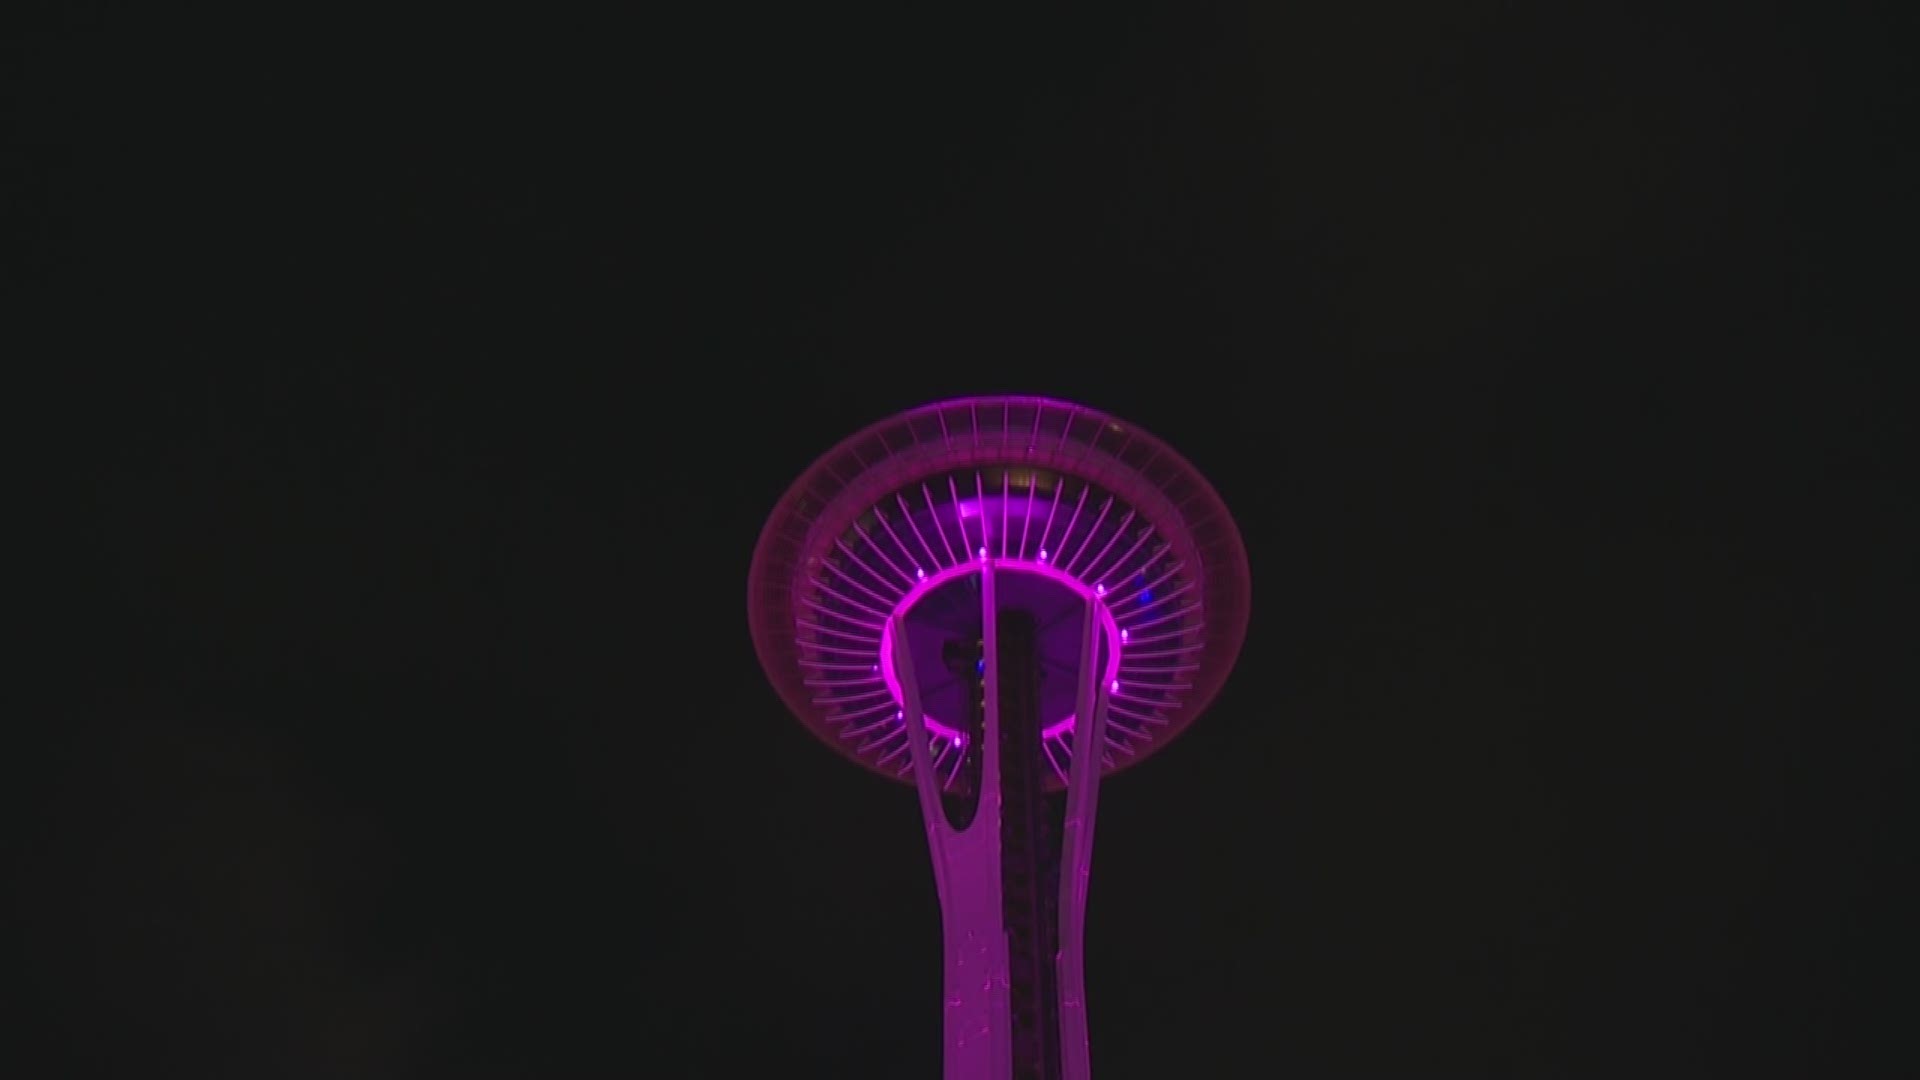 Seattle rang in 2020 with a light show at the Space Needle after high winds forced staff to cancel the fireworks display.